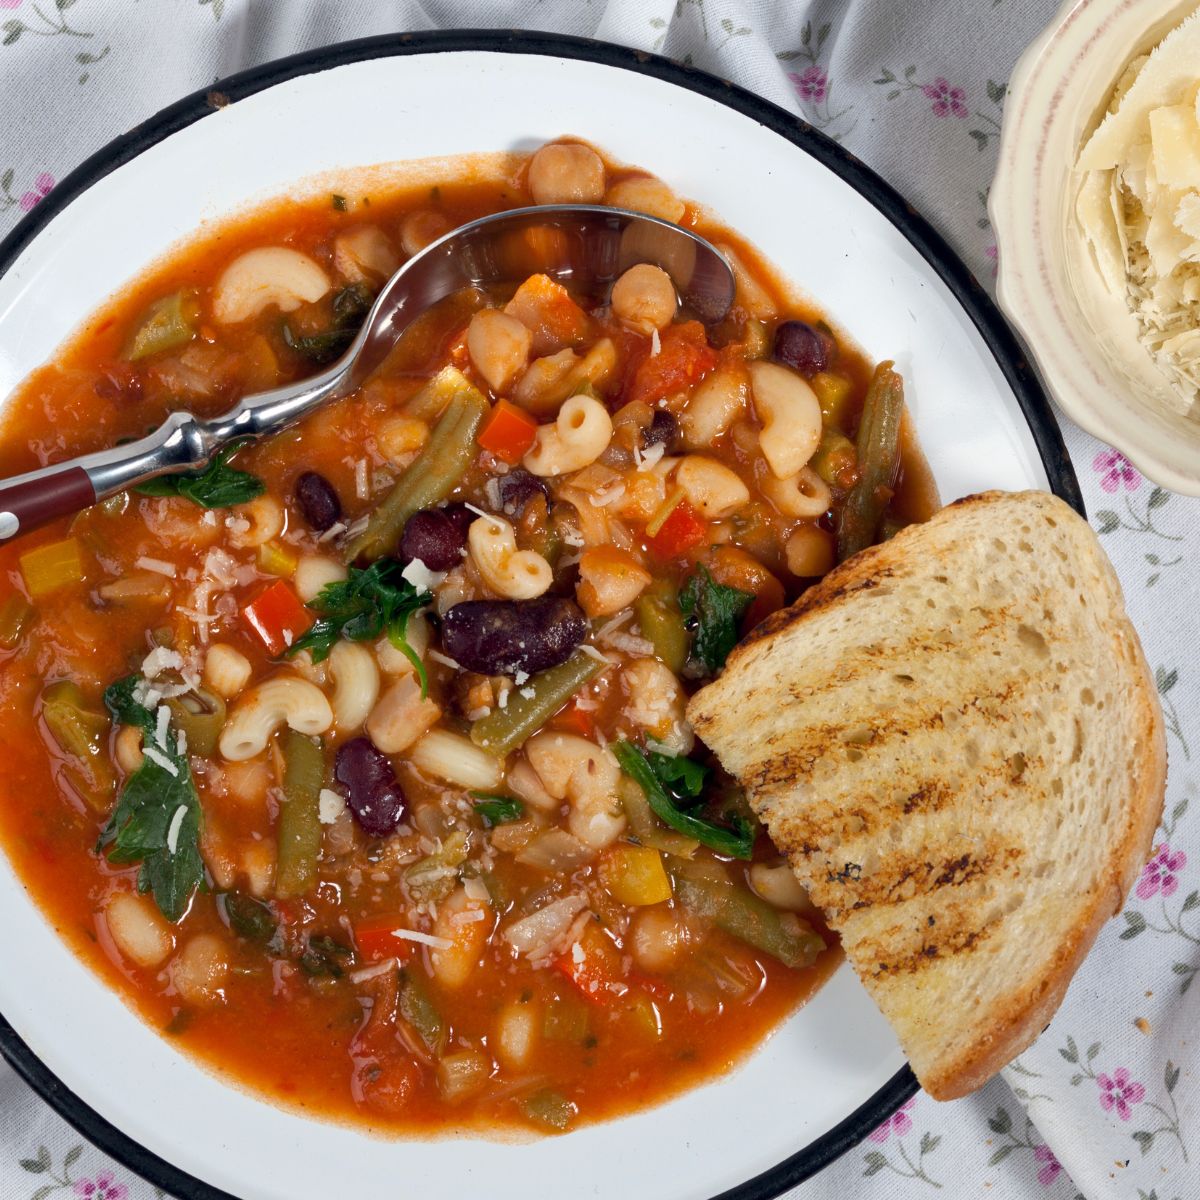 A bowl of minestrone soup with toasted bread slice